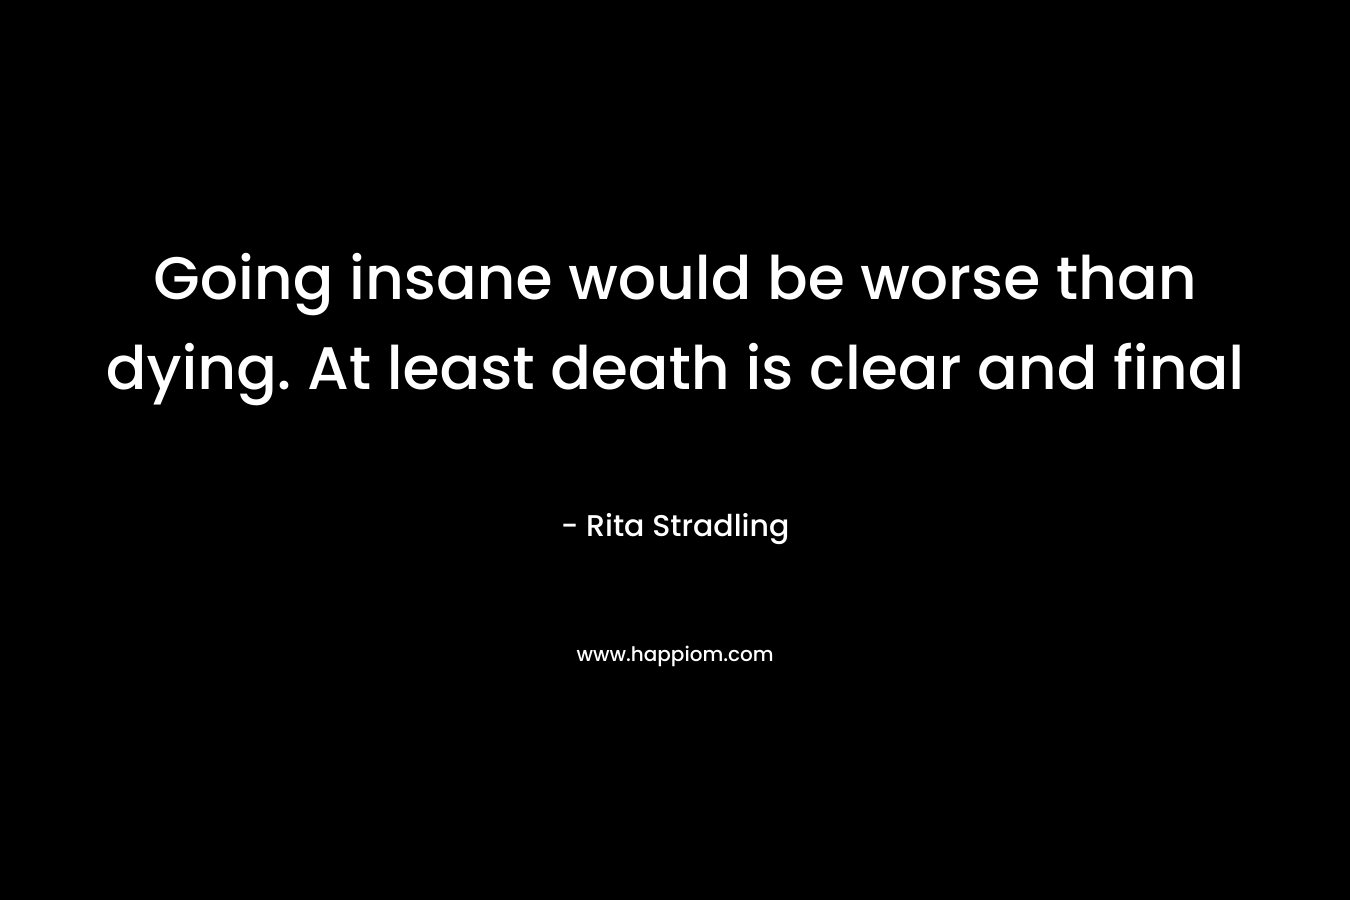 Going insane would be worse than dying. At least death is clear and final – Rita Stradling